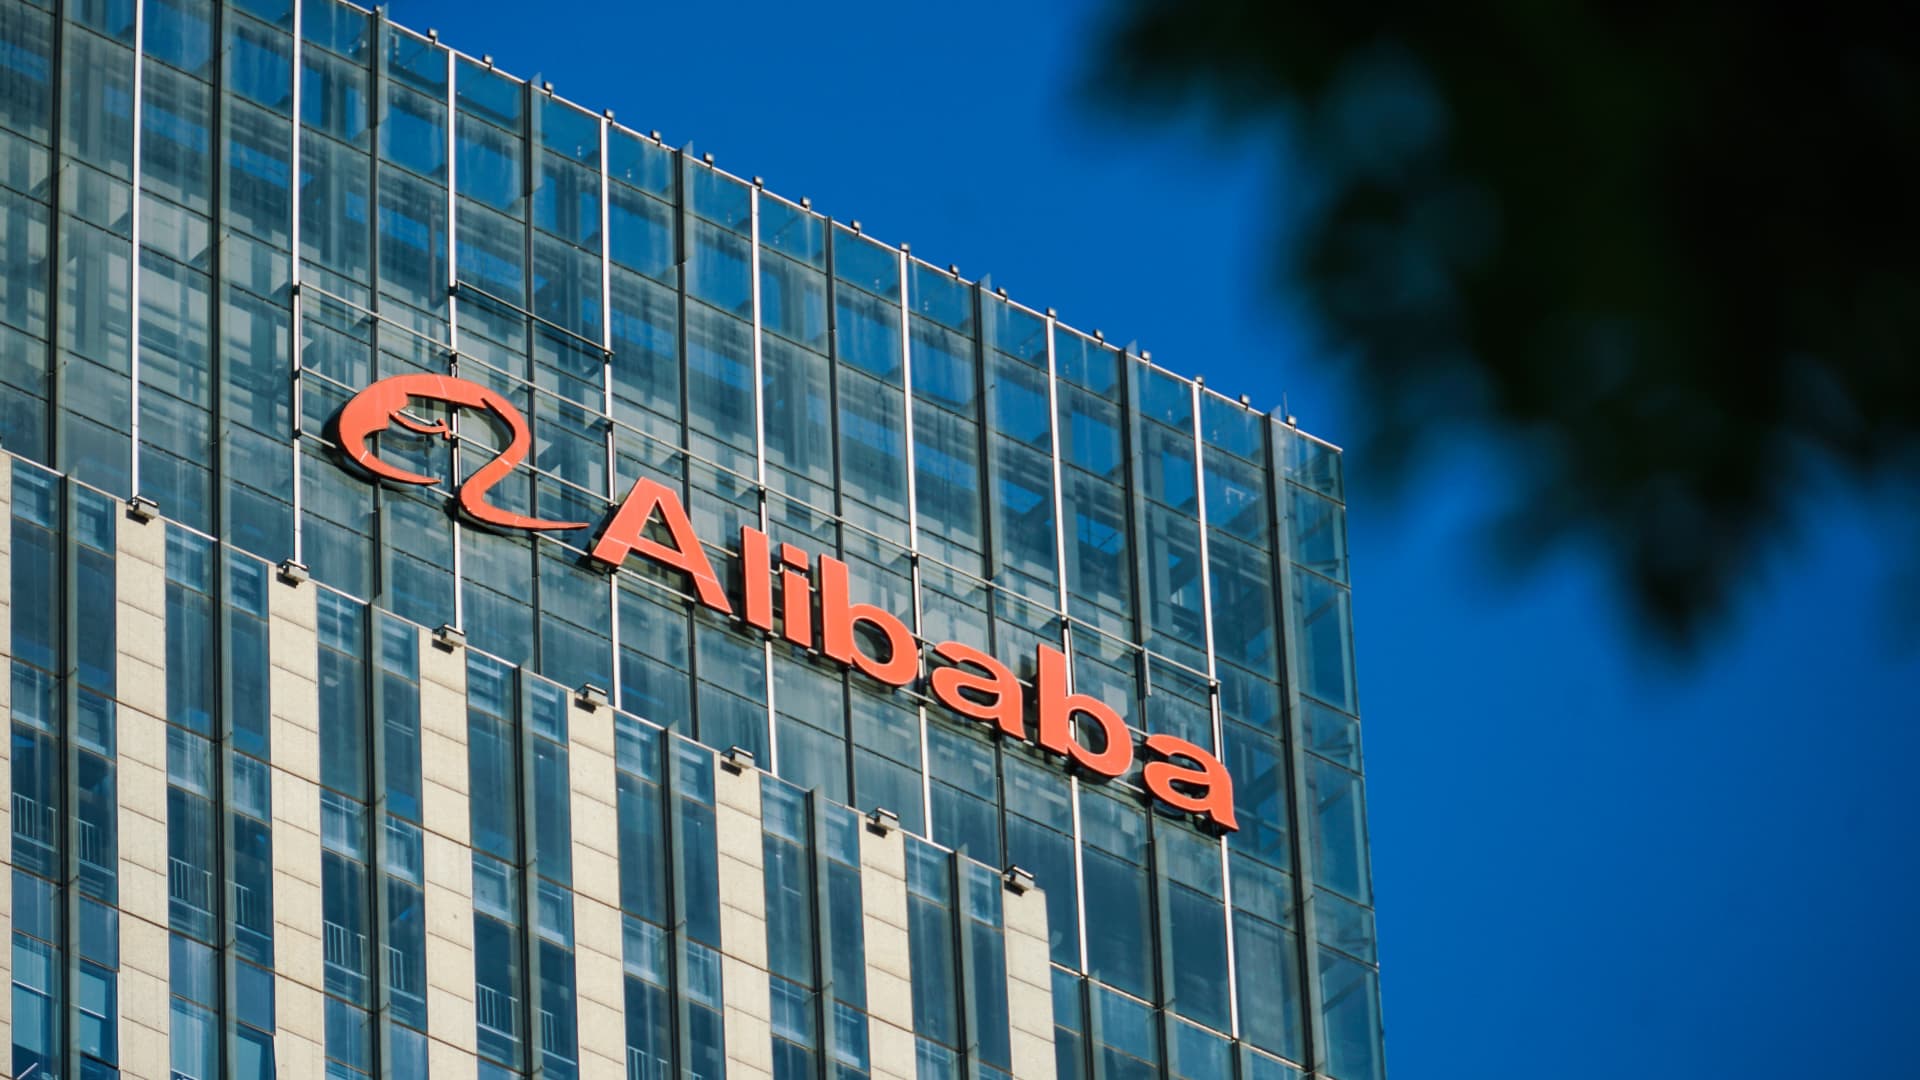 Alibaba shares tumble after SoftBank reportedly sells most of its stake